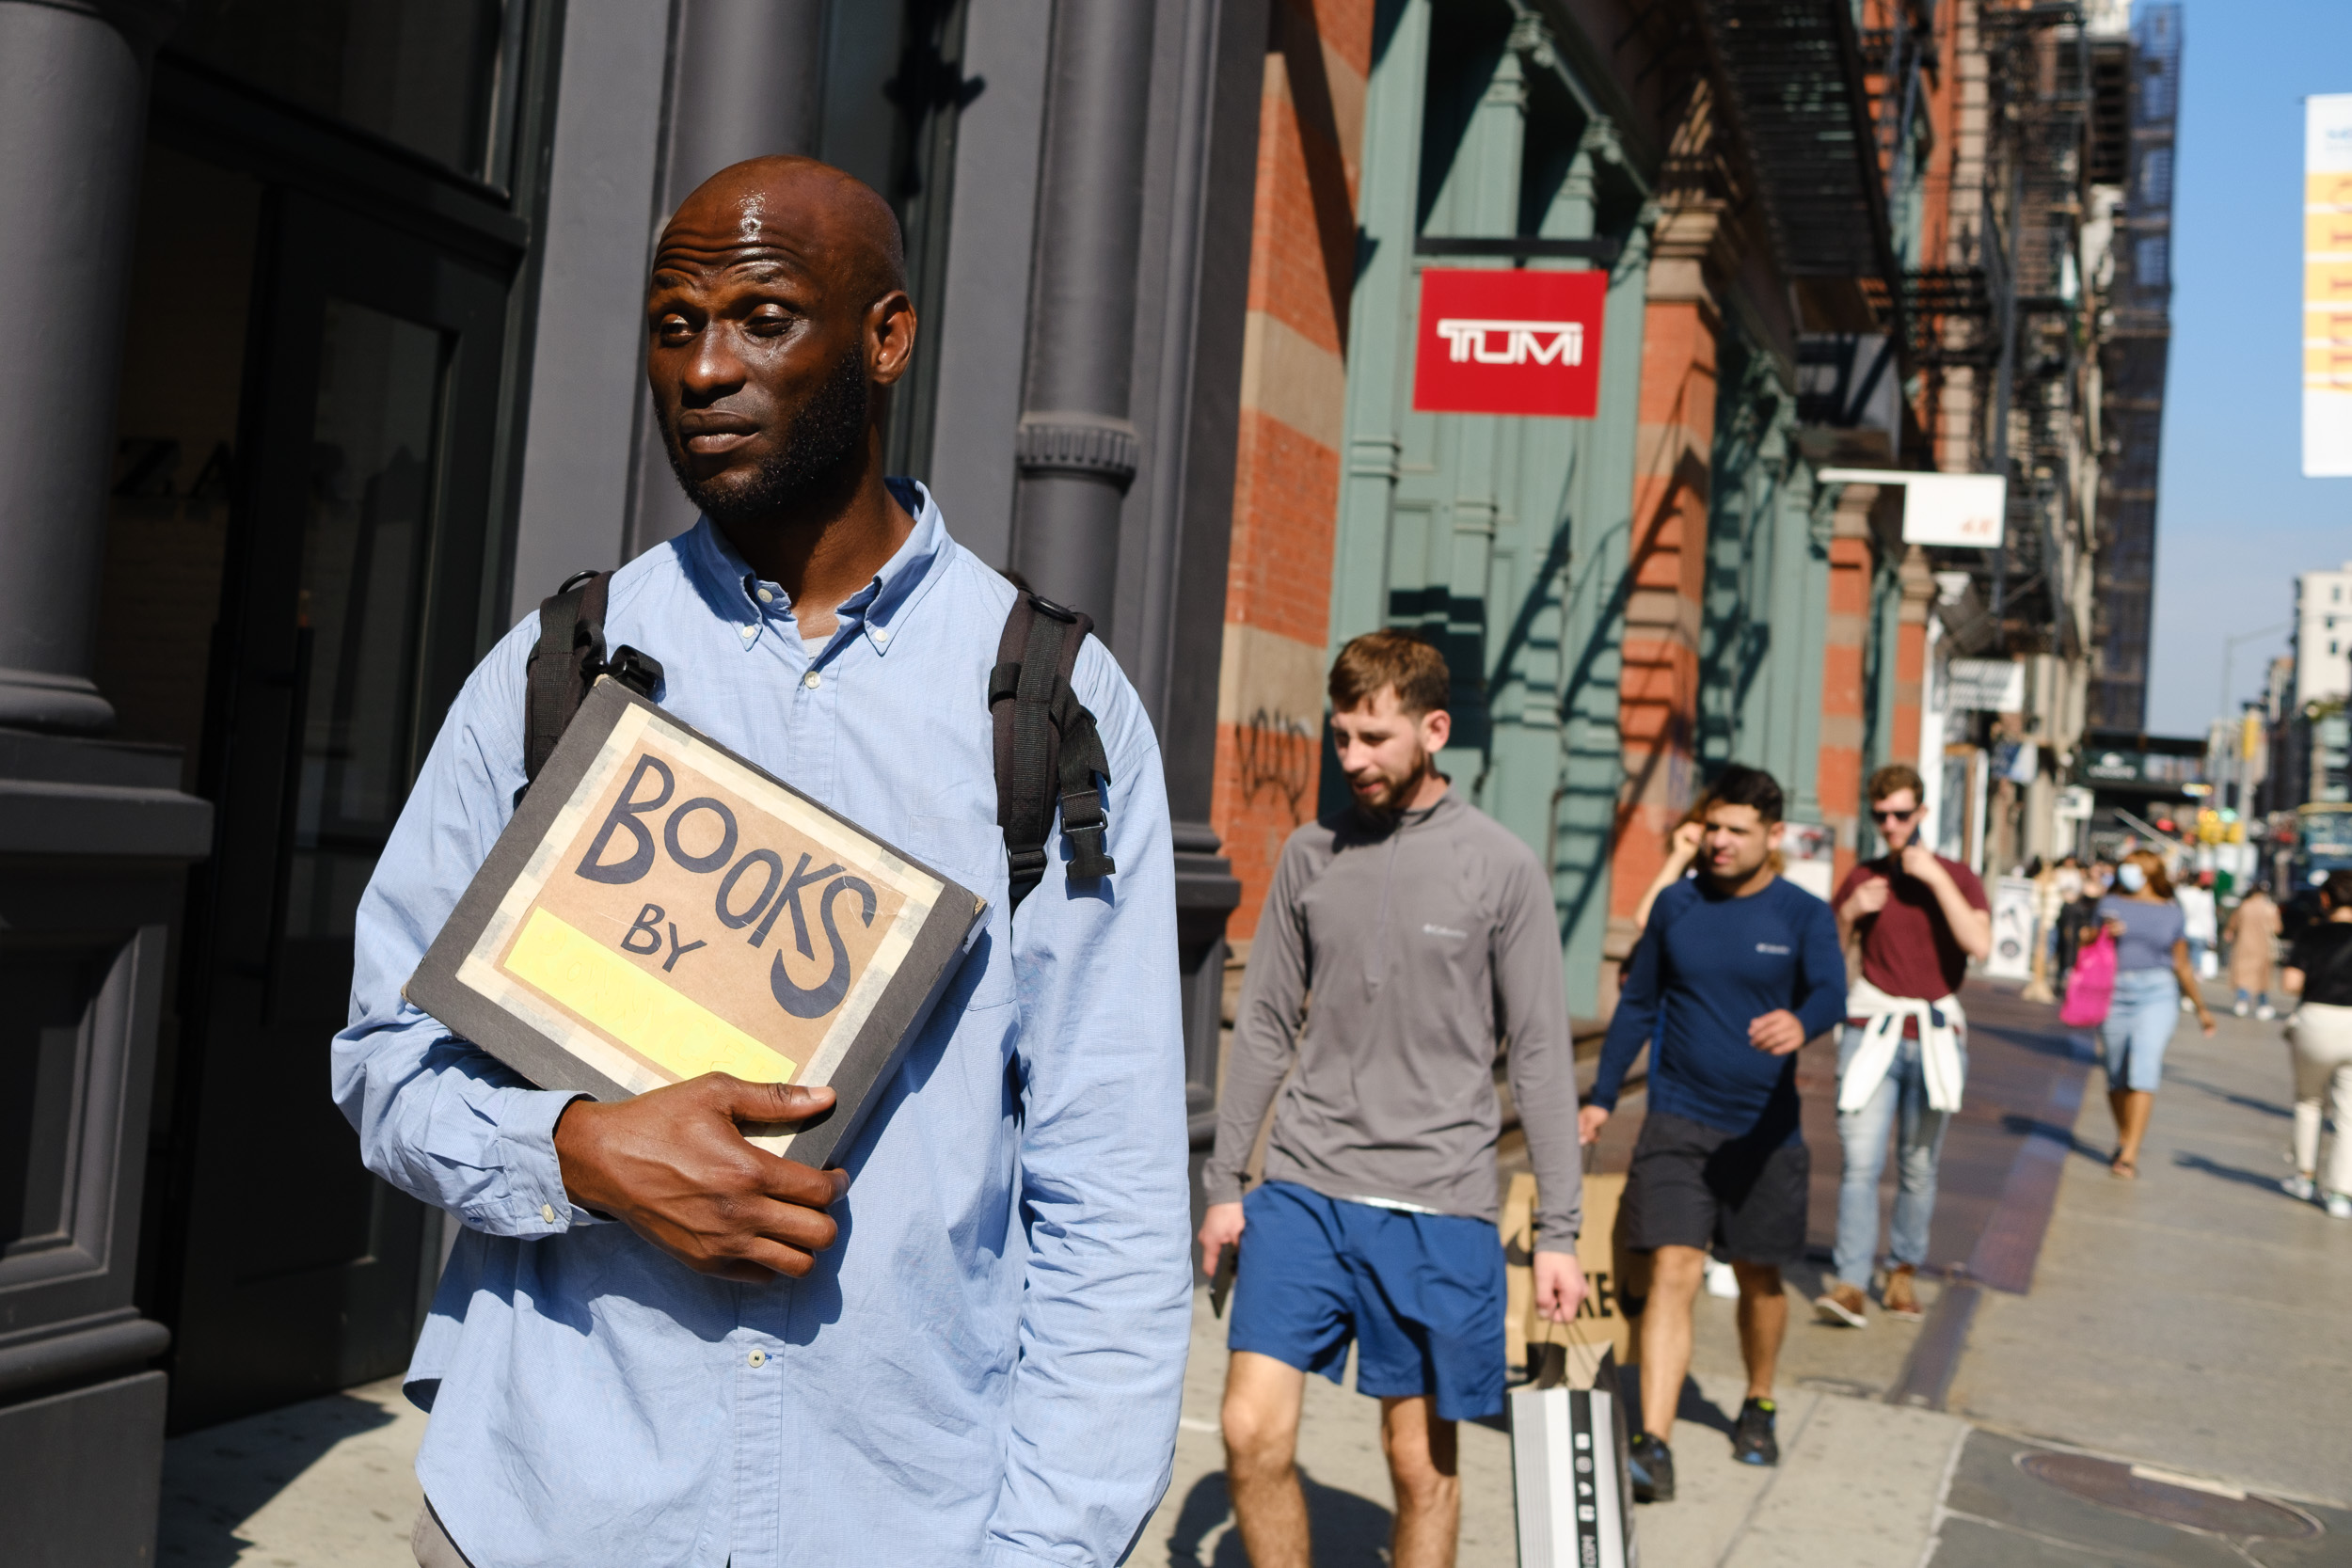 Man holding books by sign  in soho nyc